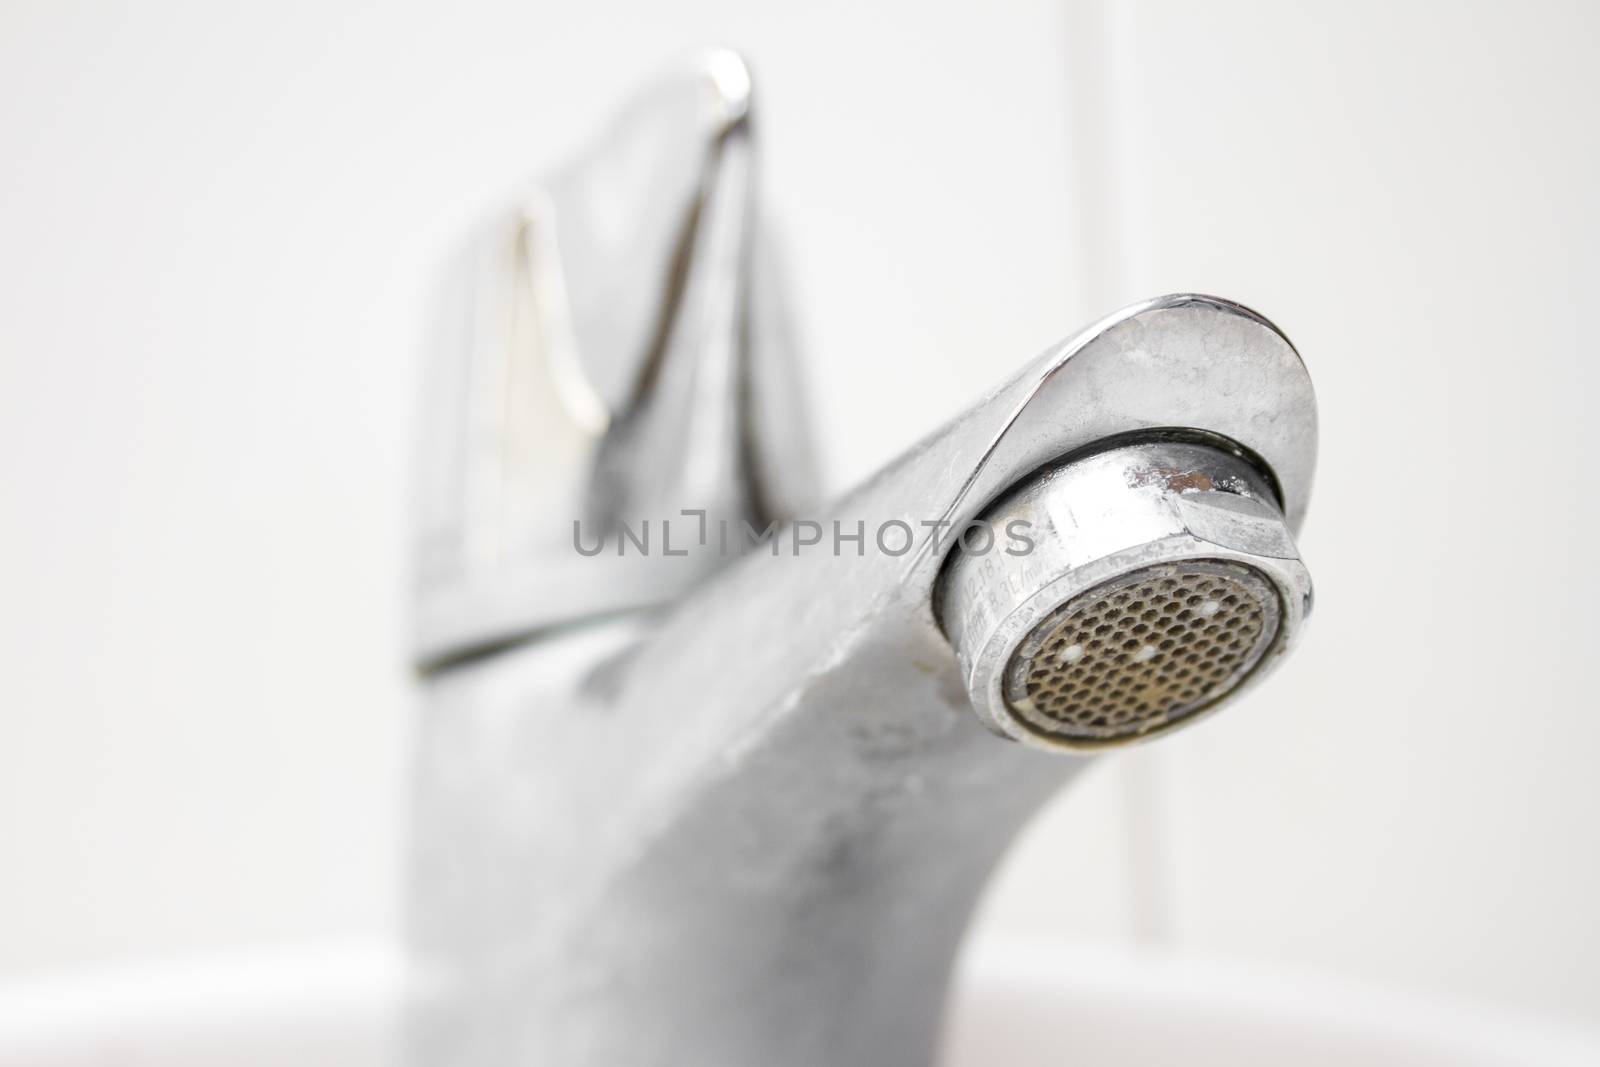 Modern style dirty faucet closeup view on white tiles background, small depth of field